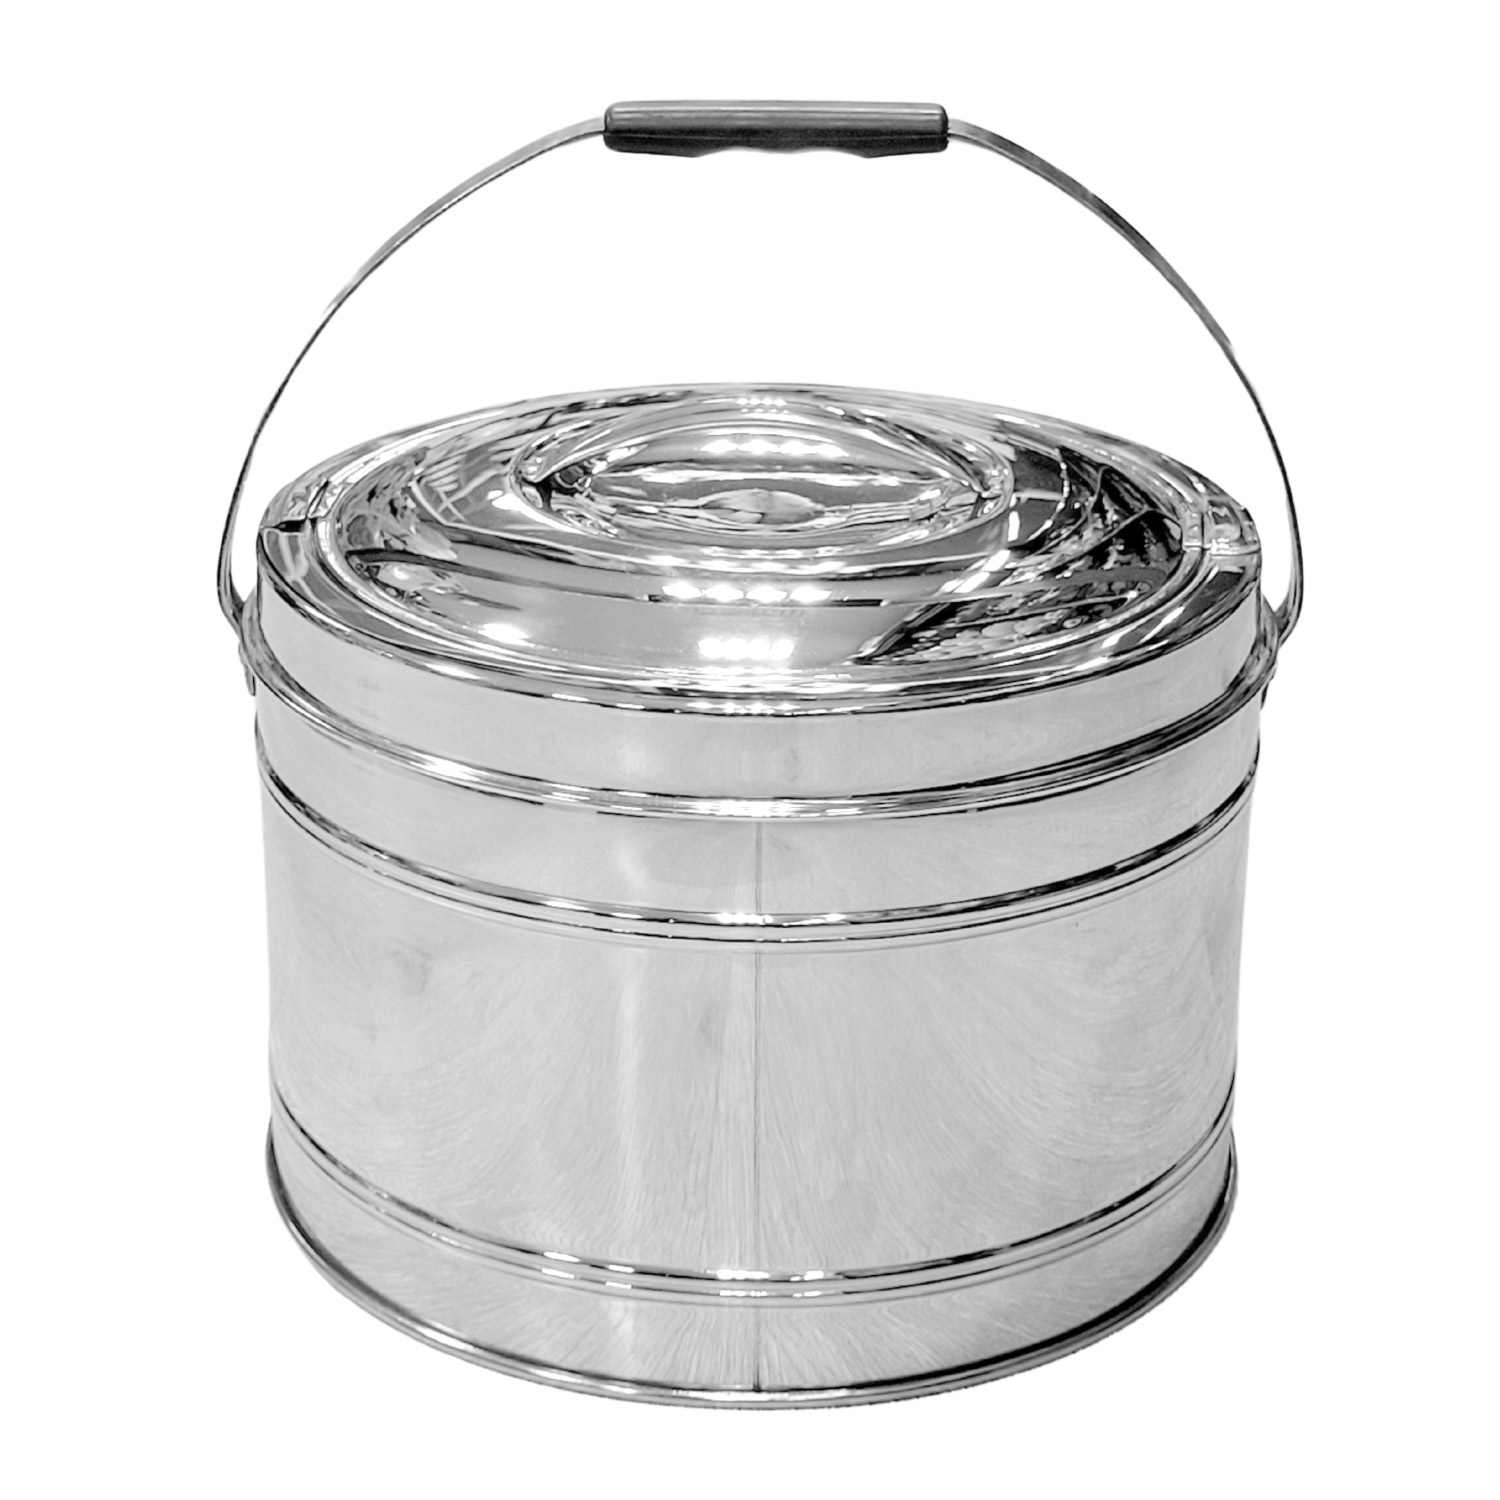 VINOD INSULATED FOOD STORAGE CONTAINERS 5 LTR